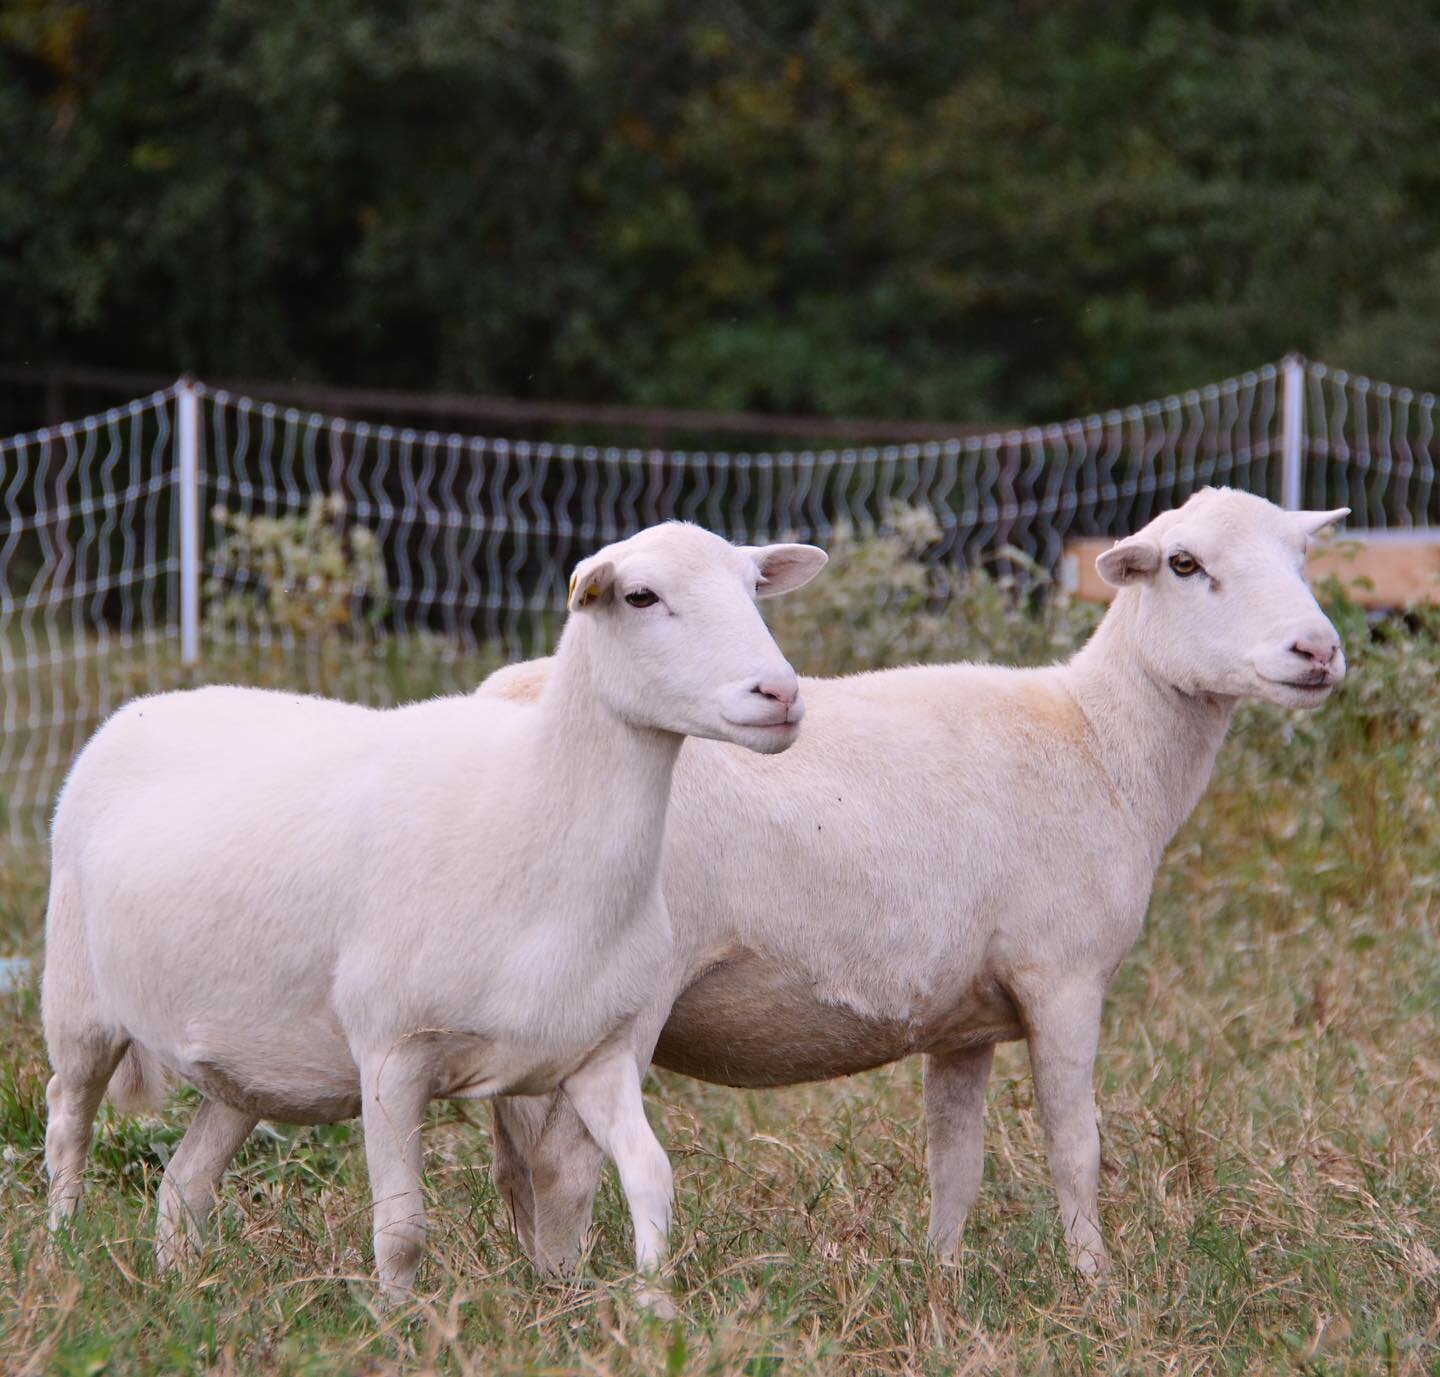 Two of our pregnant Kathadin sheep that we have here on C6 Farms. What&rsquo;s your favorite animal that we have on the farm?